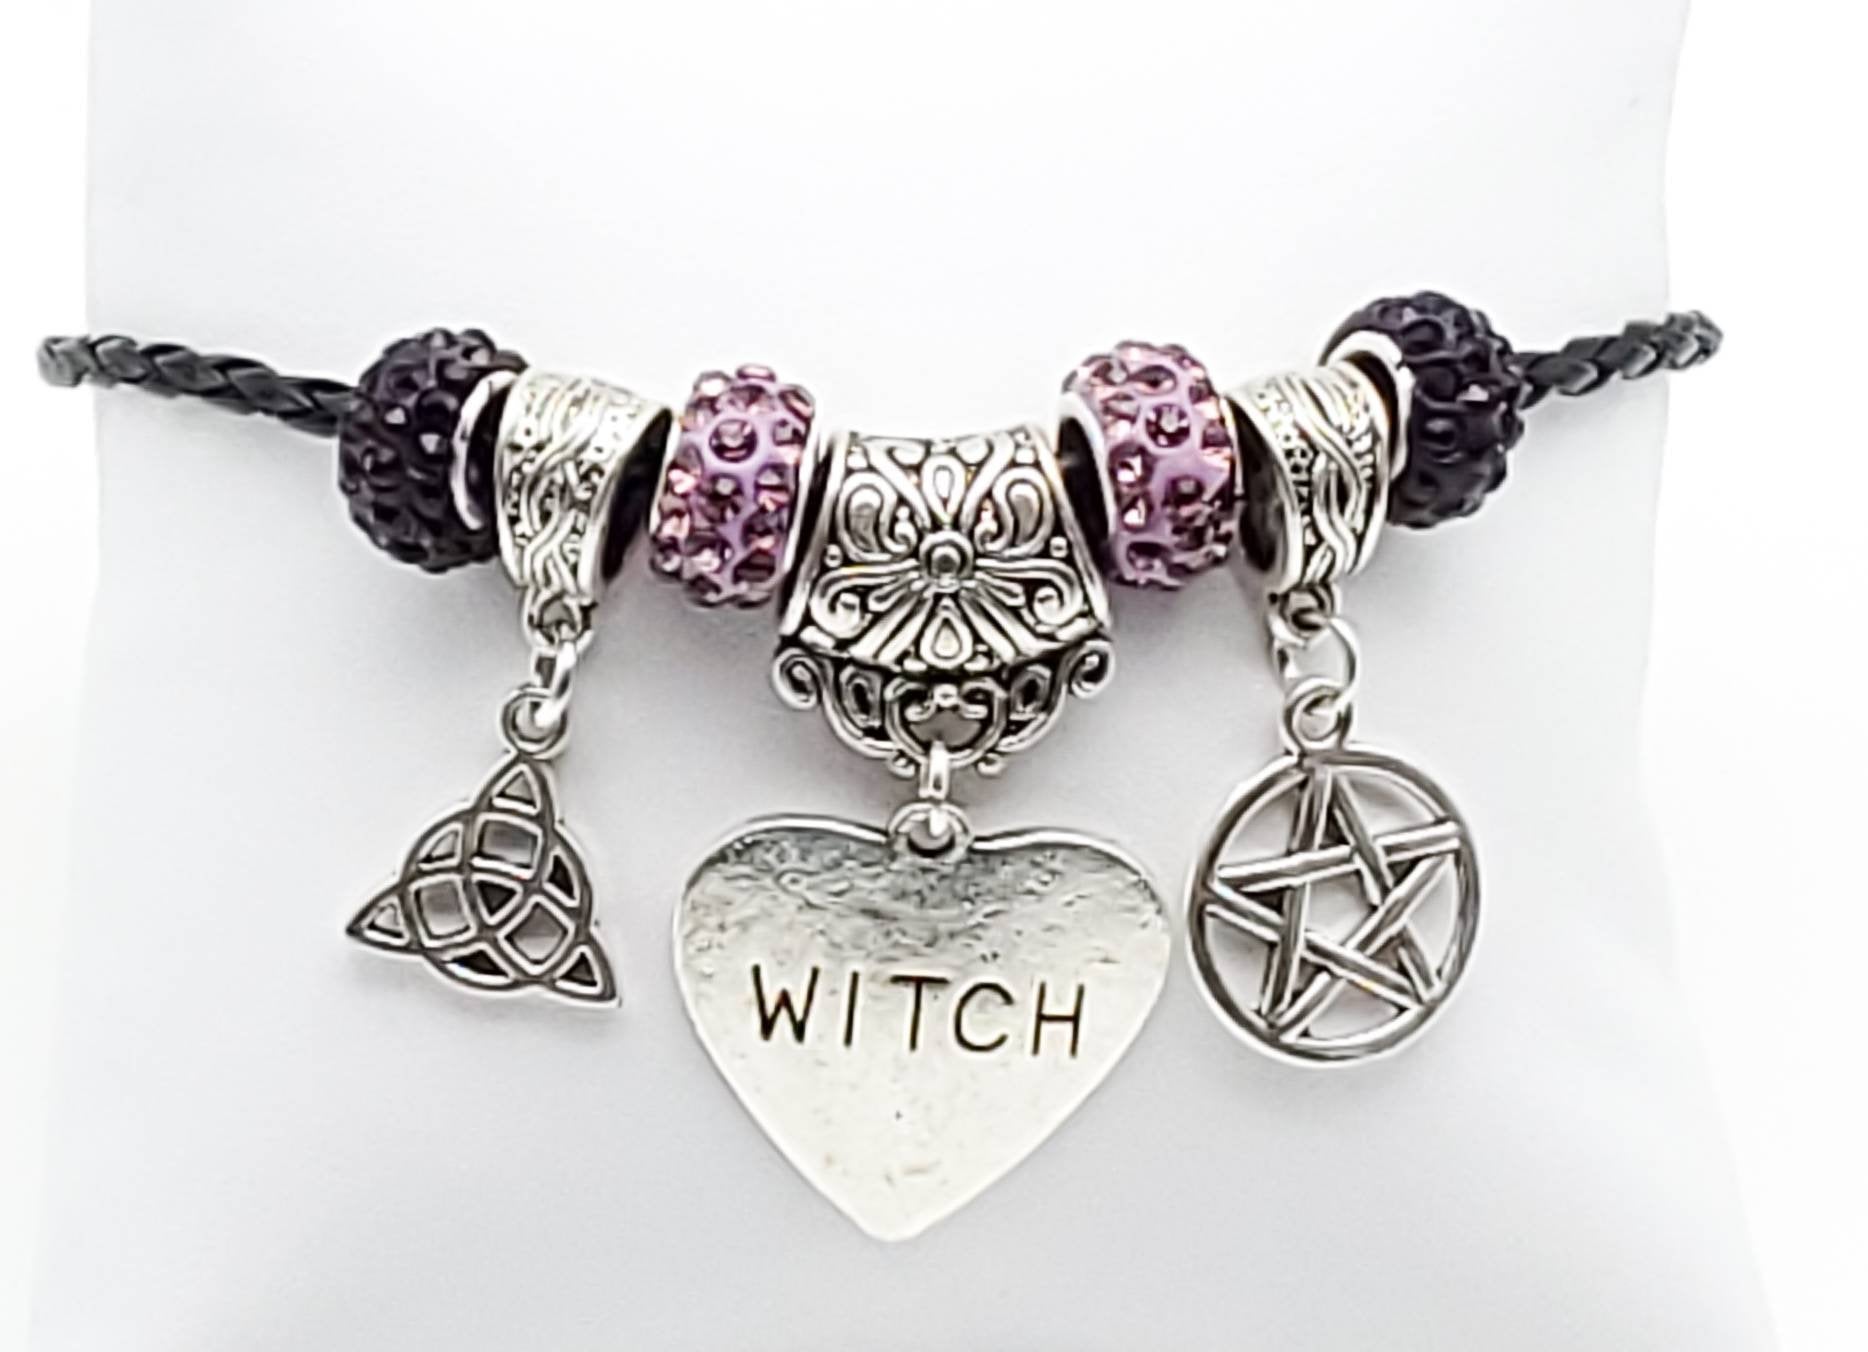 Black Leather Bracelet with Triquera, Pentacle and WITCH Heart Charms - The Caffeinated Raven